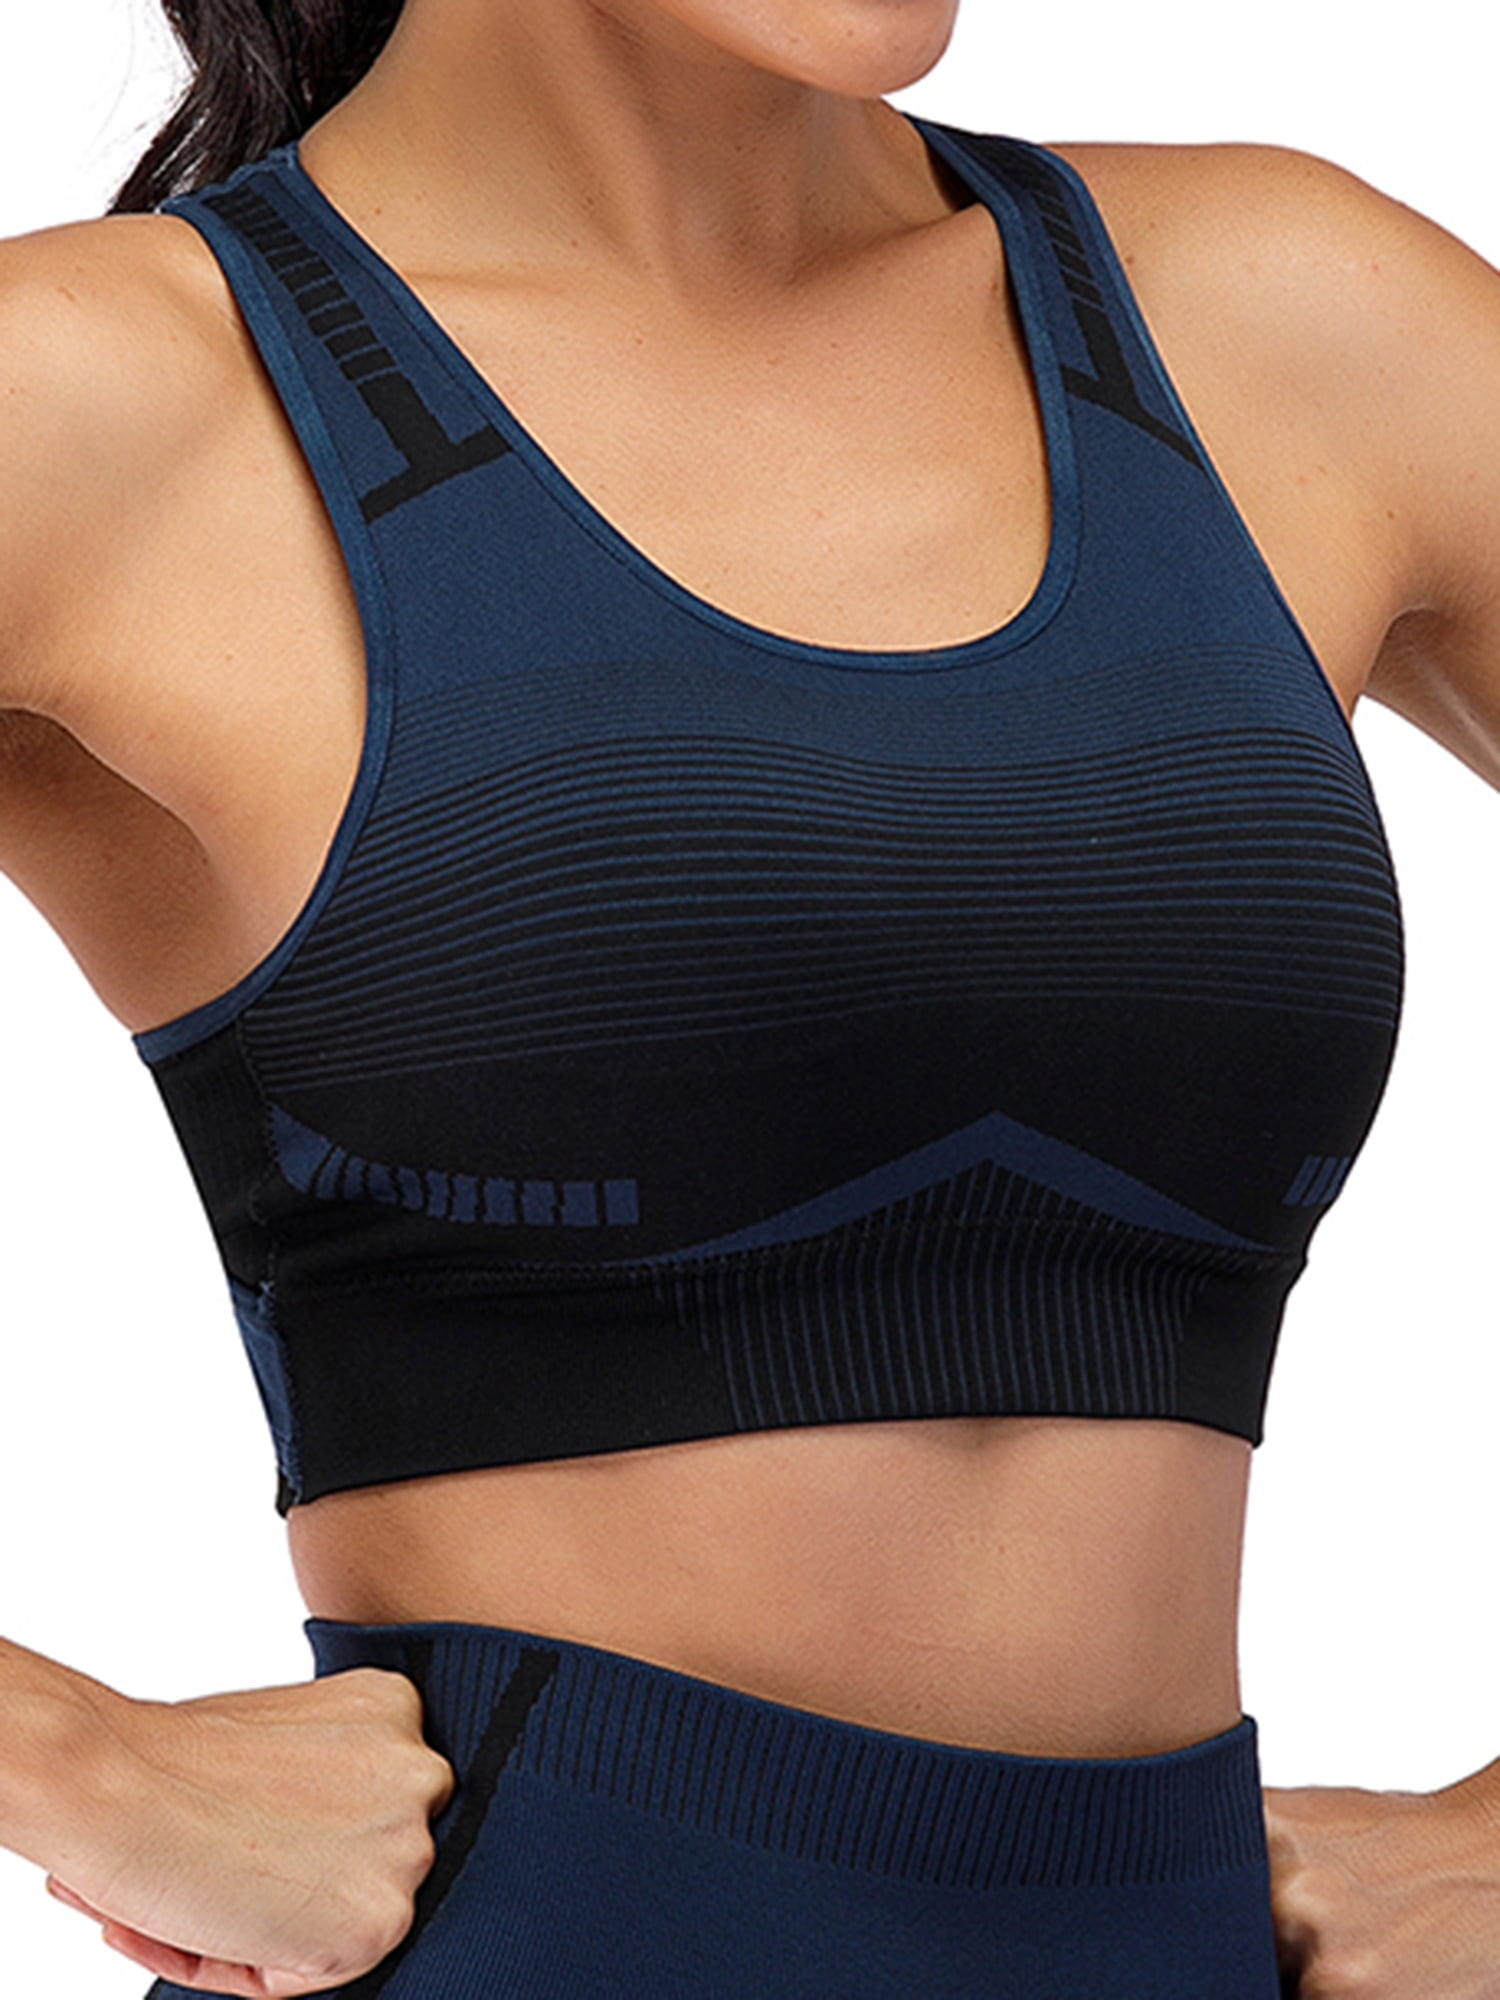 Supportive Sports Bras for Women Running Padded Compression Sports